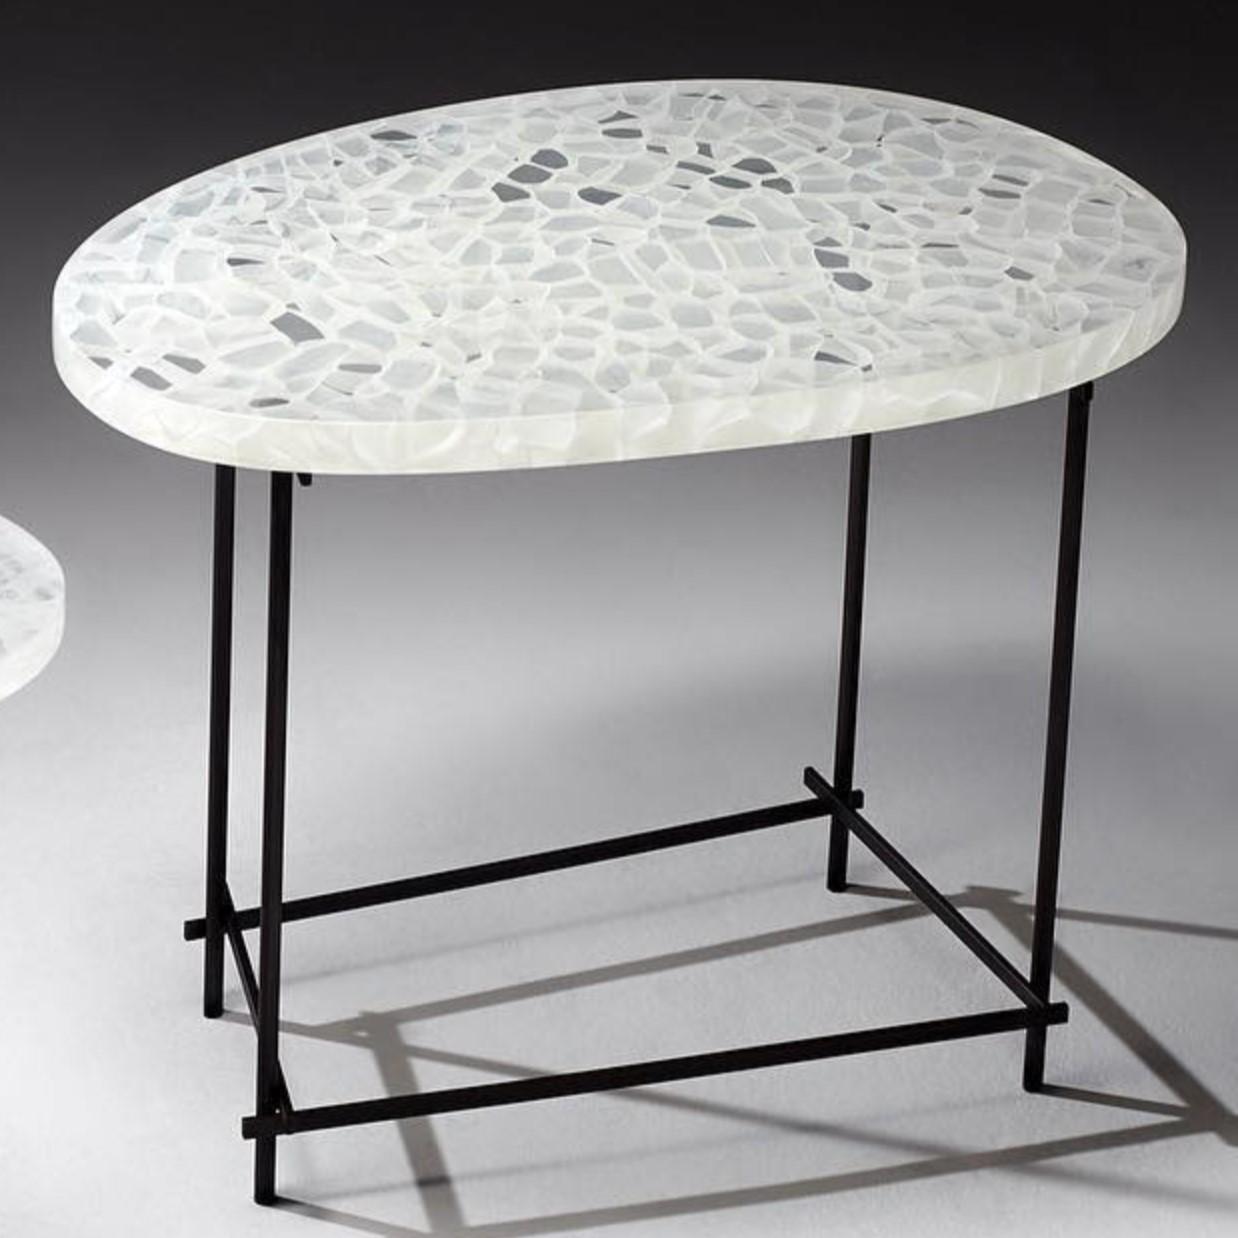 Large Stix Table by The GoodMan Studio
Dimensions: W 49 x D 72 x H 56 cm
Materials: Metal, Steel, Temple Glass - River Rock

Kilncast Temple glass. Hand made and polished
Glass and Steel Table base.

The Goodman Studio has been internationally